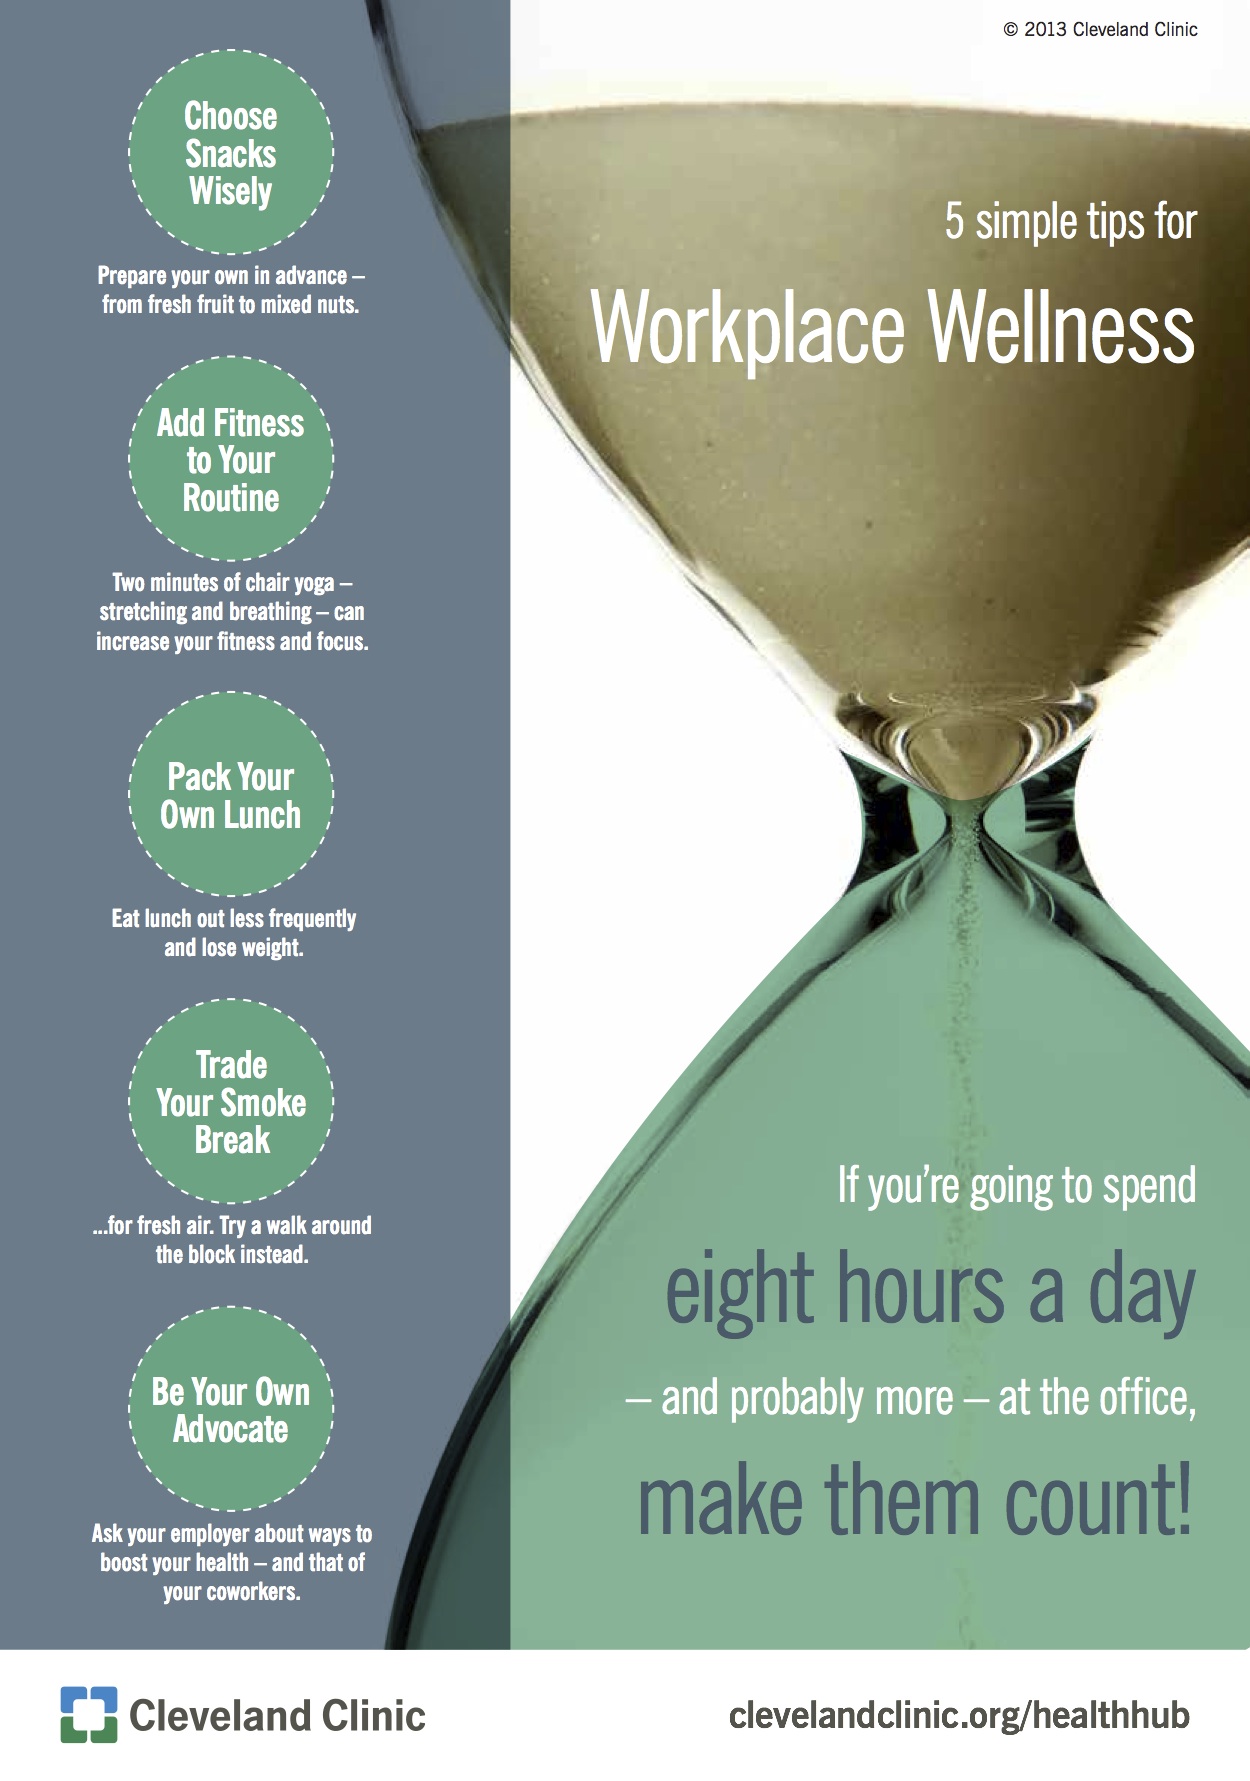 5 Simple Tips For Workplace Wellness From The Cleveland Clinic